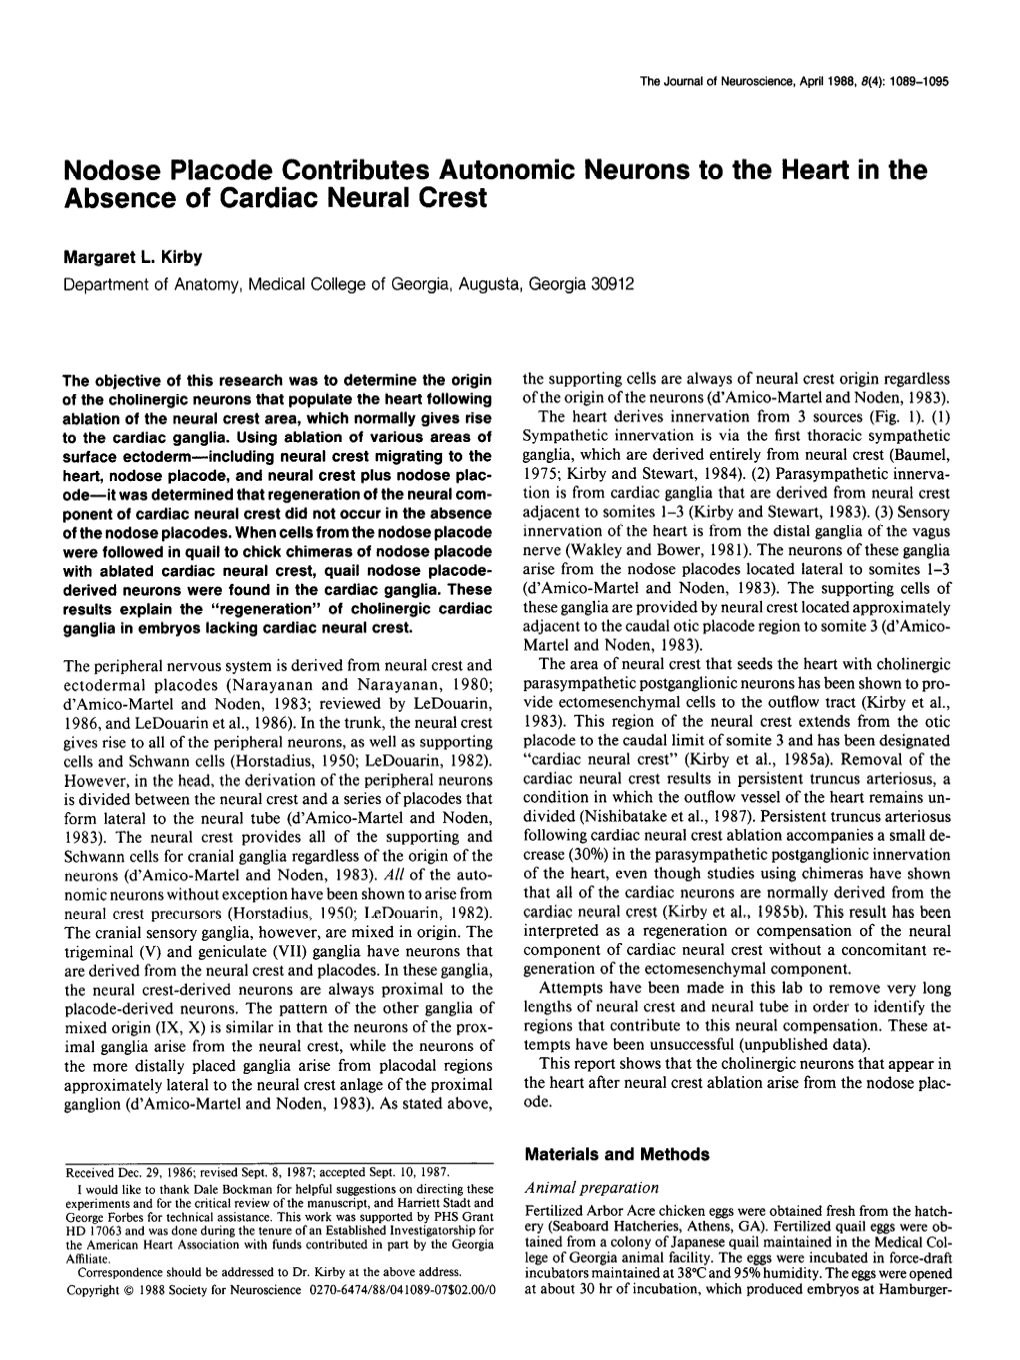 Nodose Placode Contributes Autonomic Neurons to the Heart in the Absence of Cardiac Neural Crest